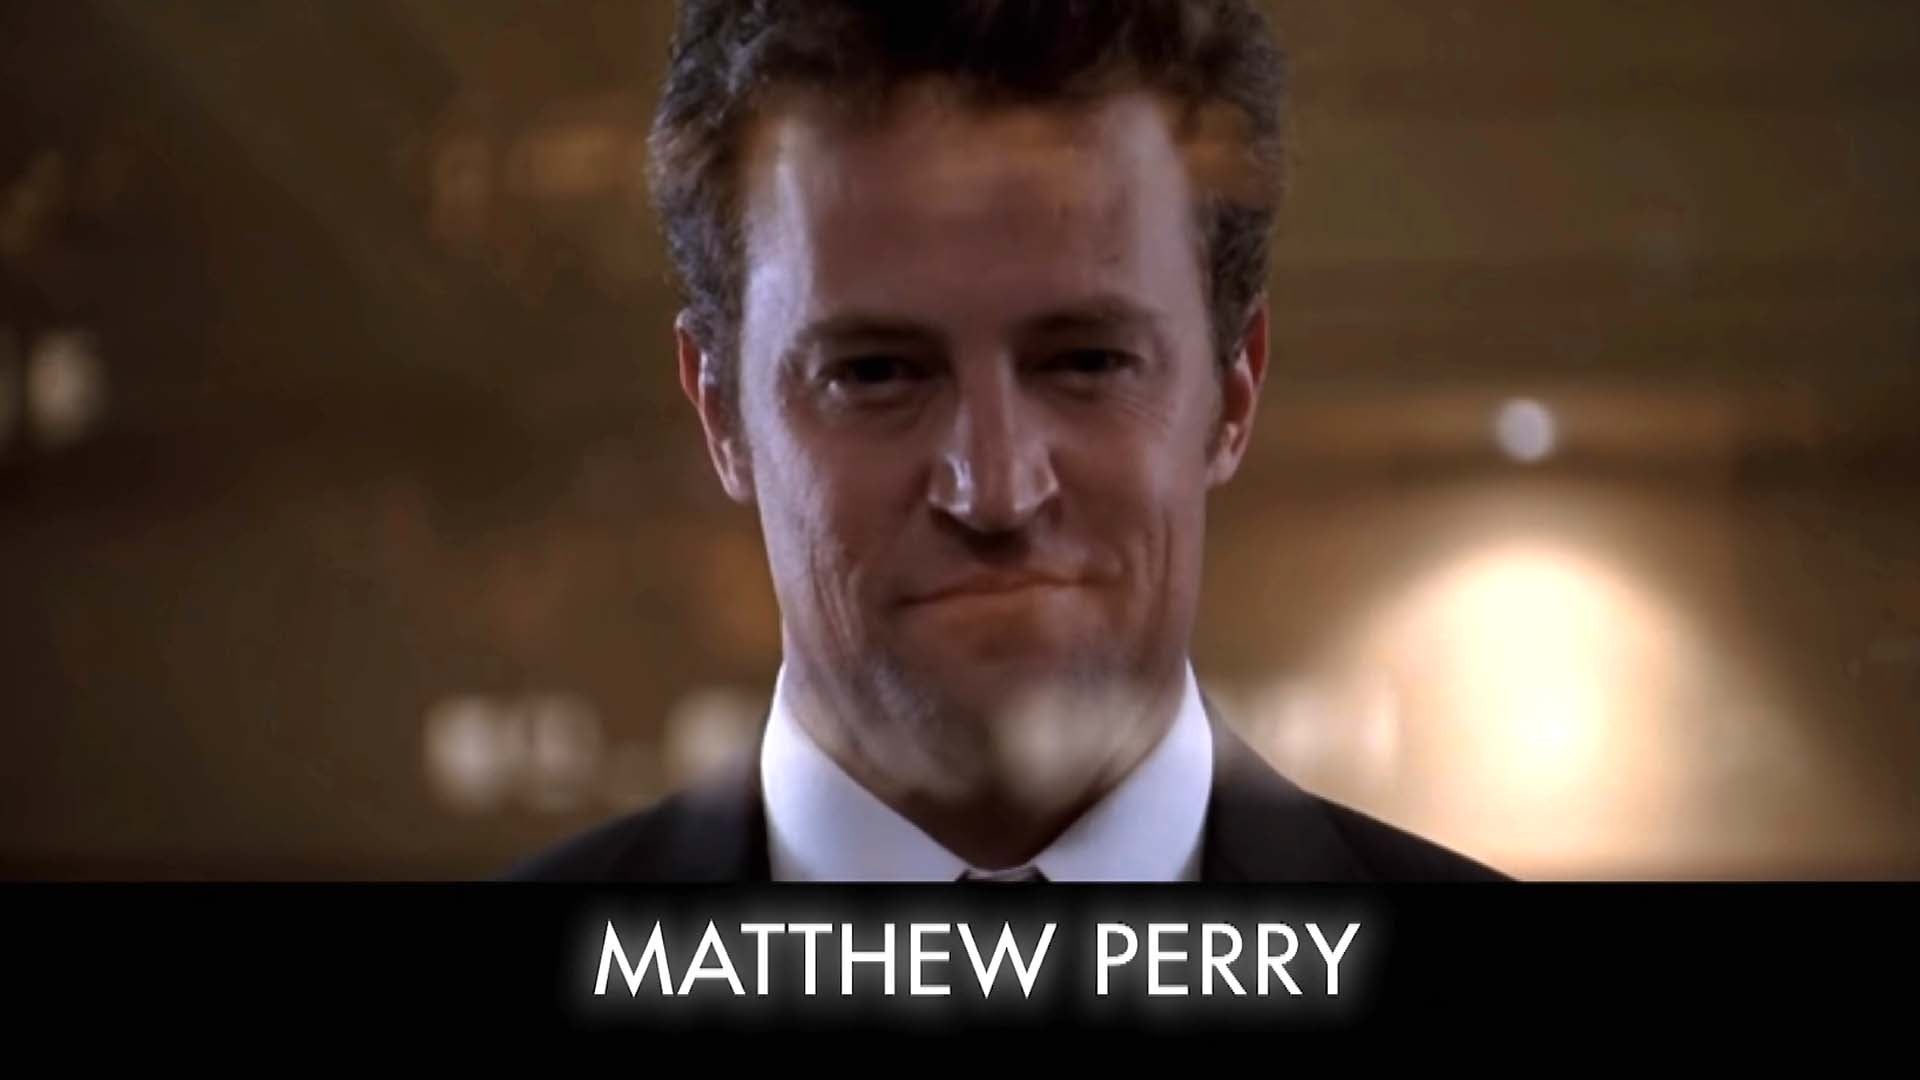 SAG Awards: How Matthew Perry Was Honored During In Memoriam Tribute